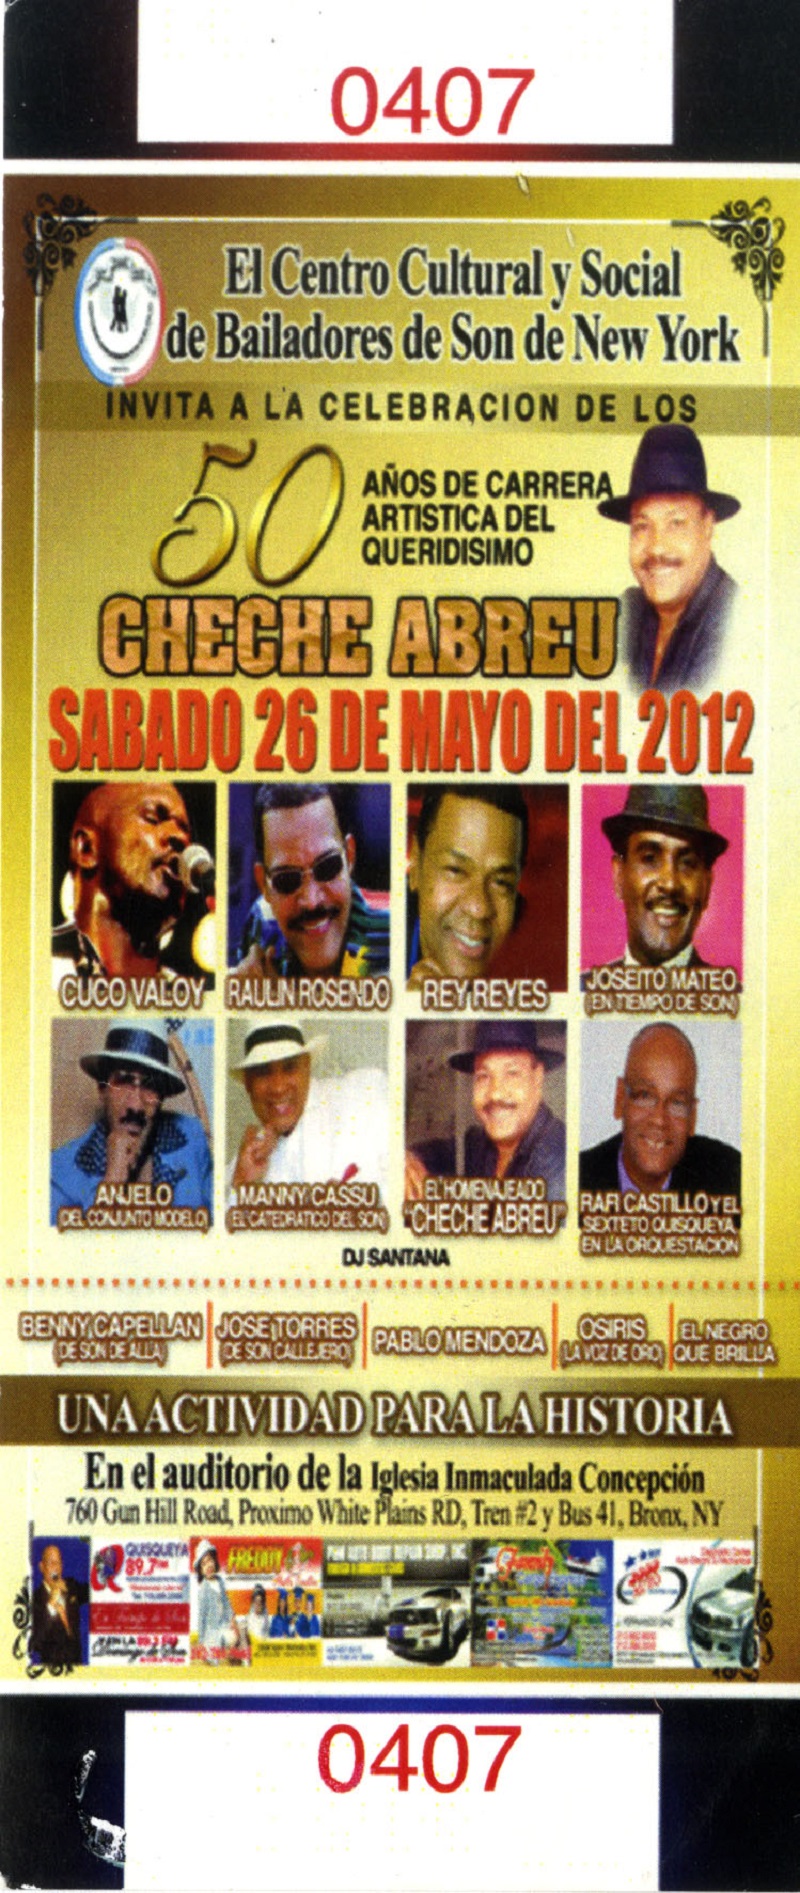 Celebration of Cheche Abreu’s Career Flyer, May 26, 2012